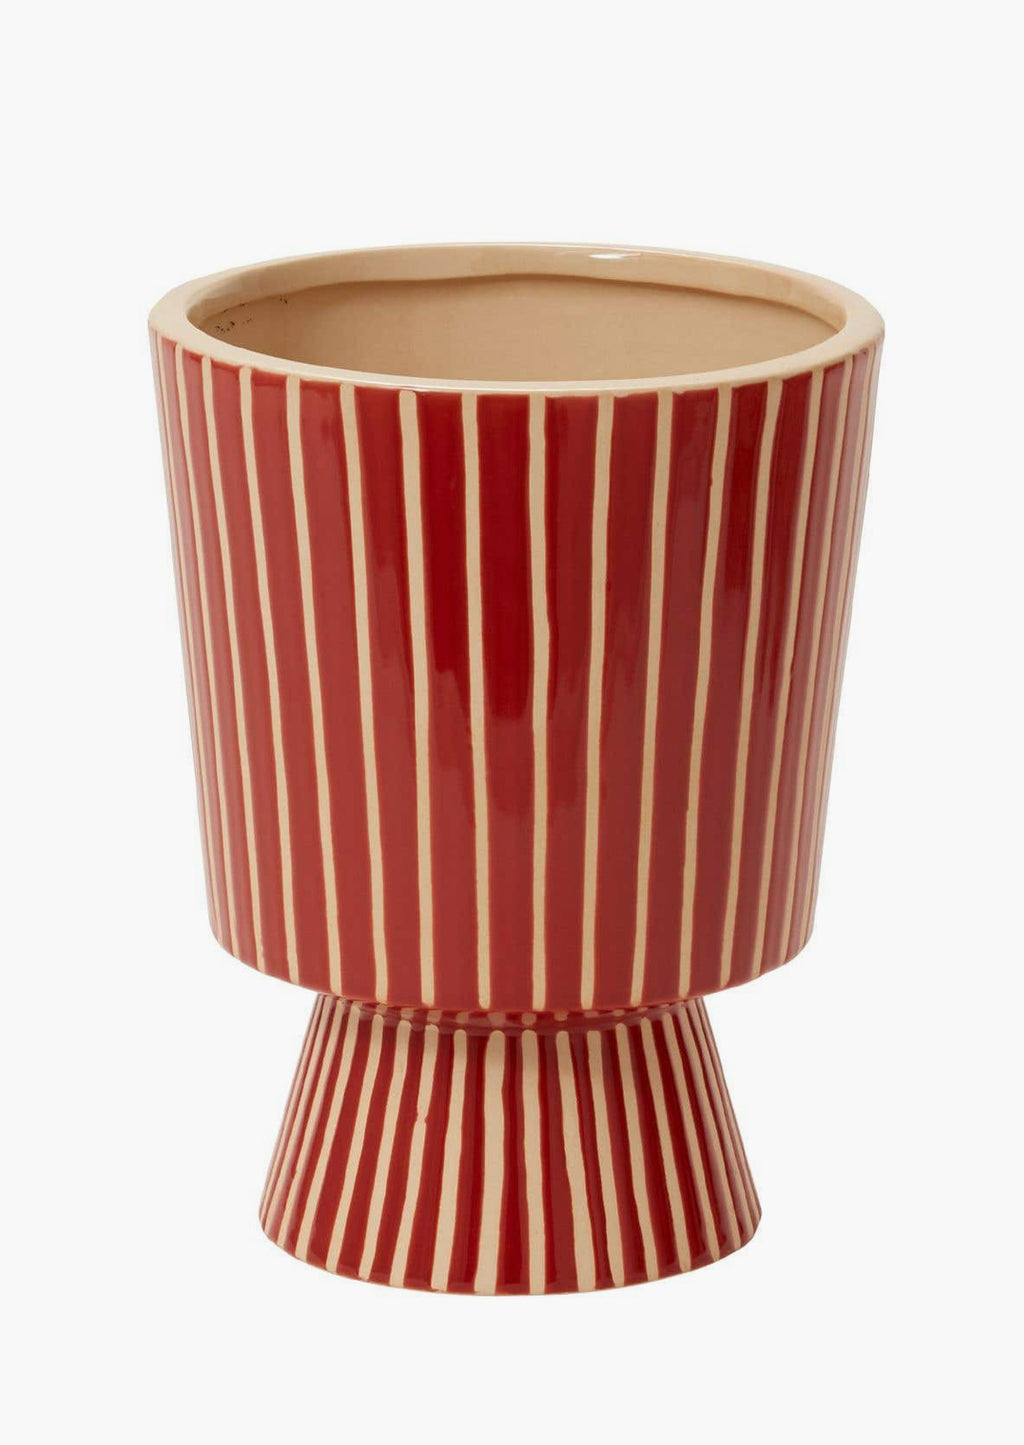 Large [$74.00]: A footed planter with vertical white stripes on red ceramic.